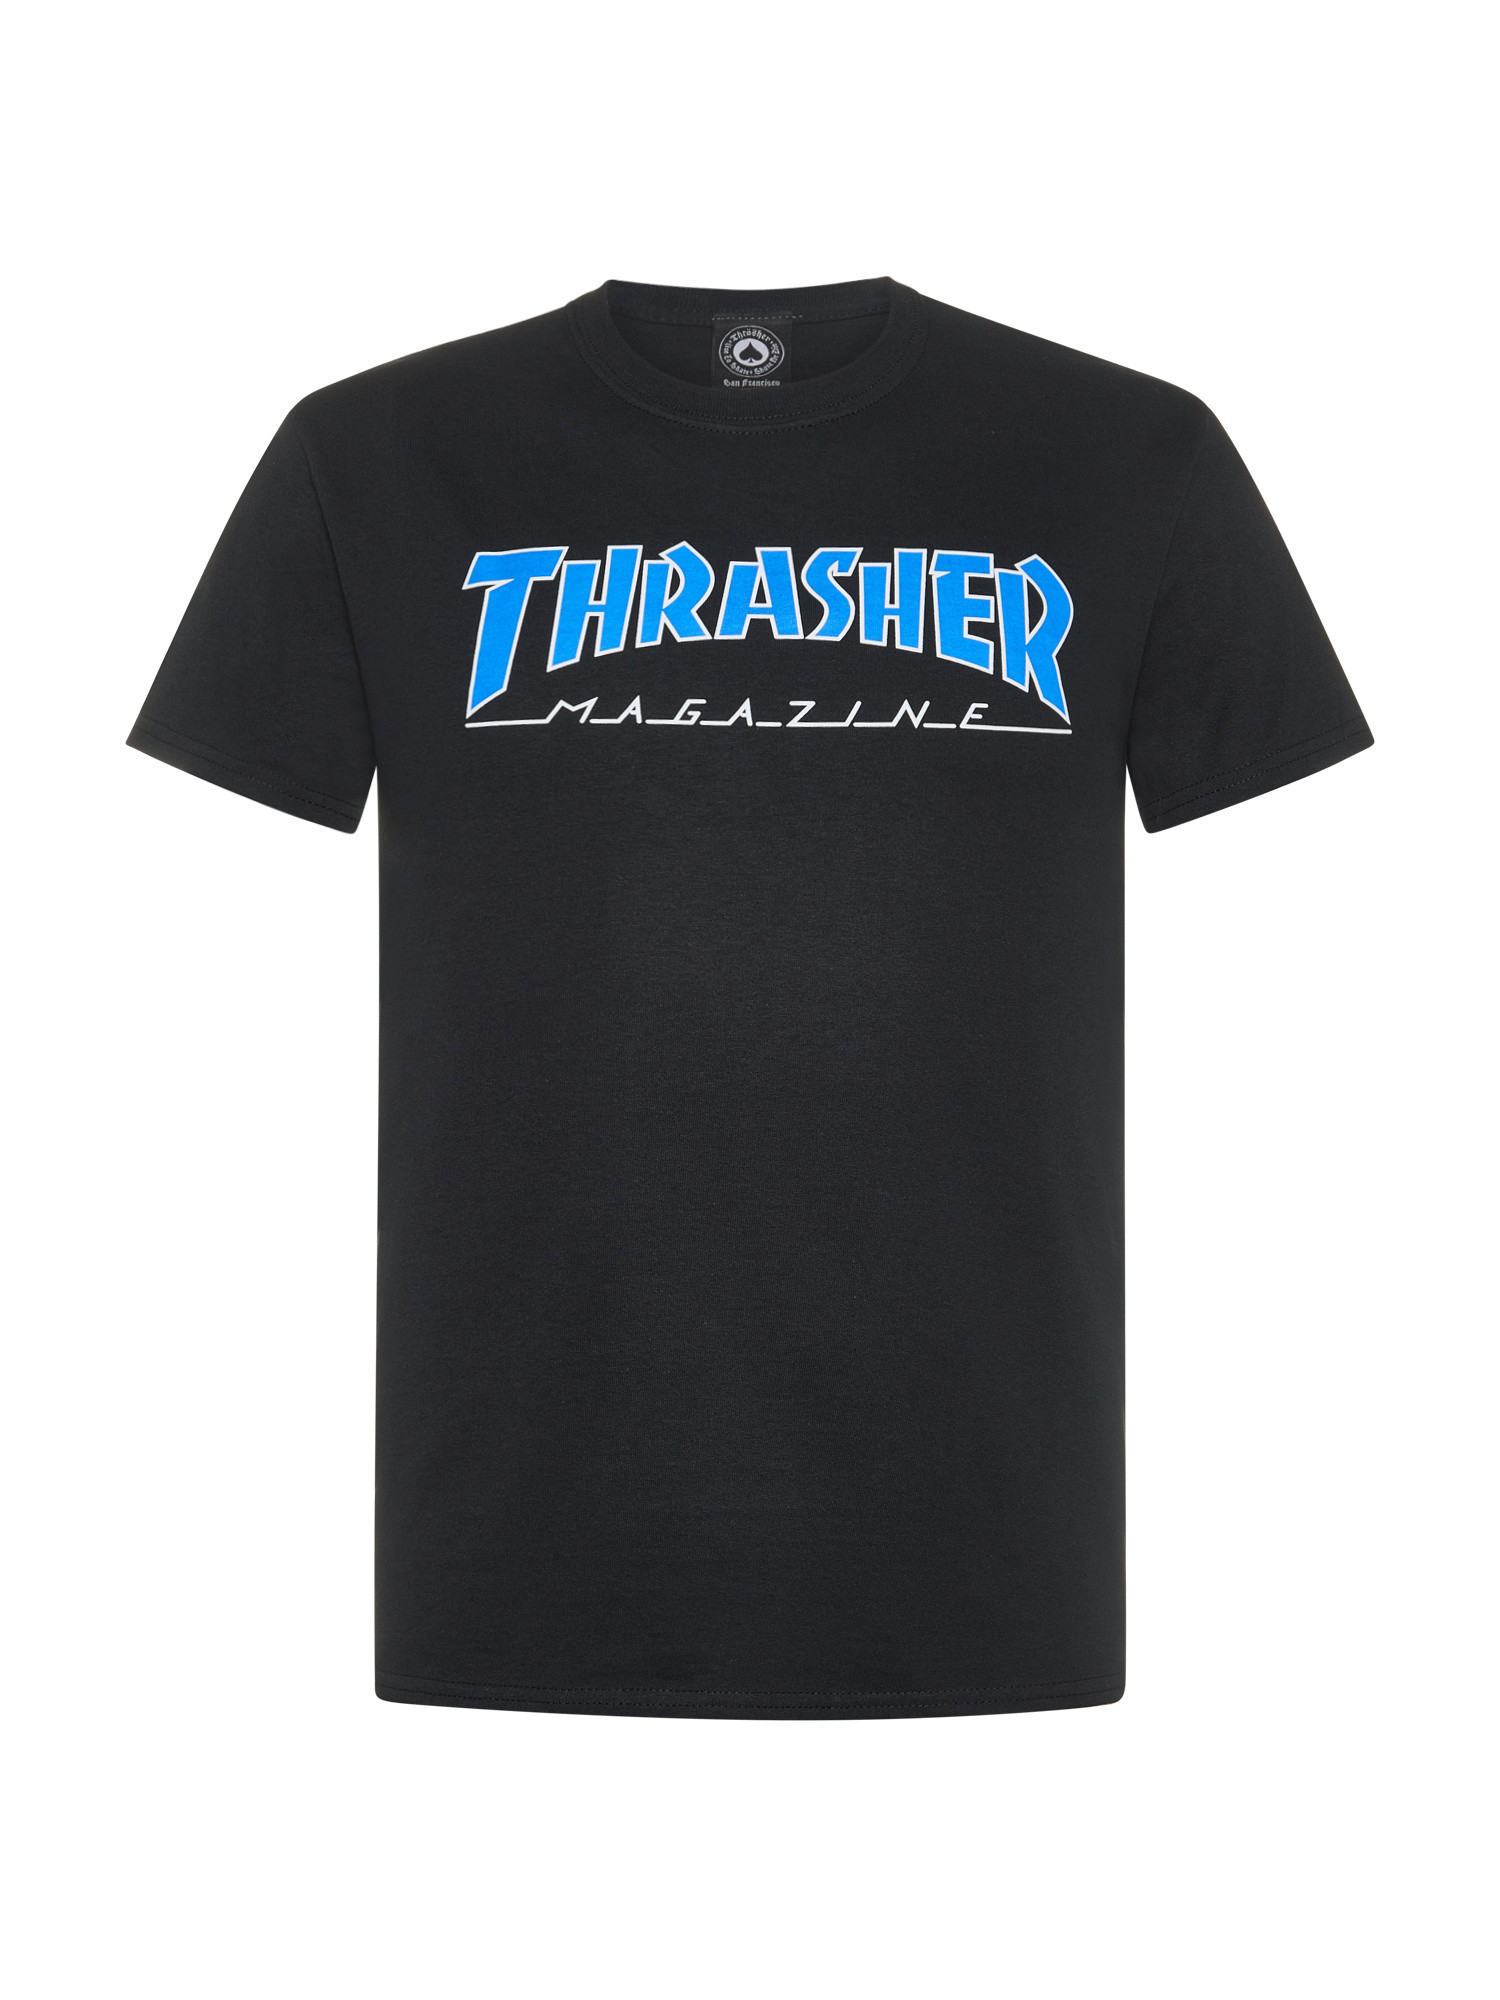 Thrasher - T-Shirt con logo outlined, Nero, large image number 0